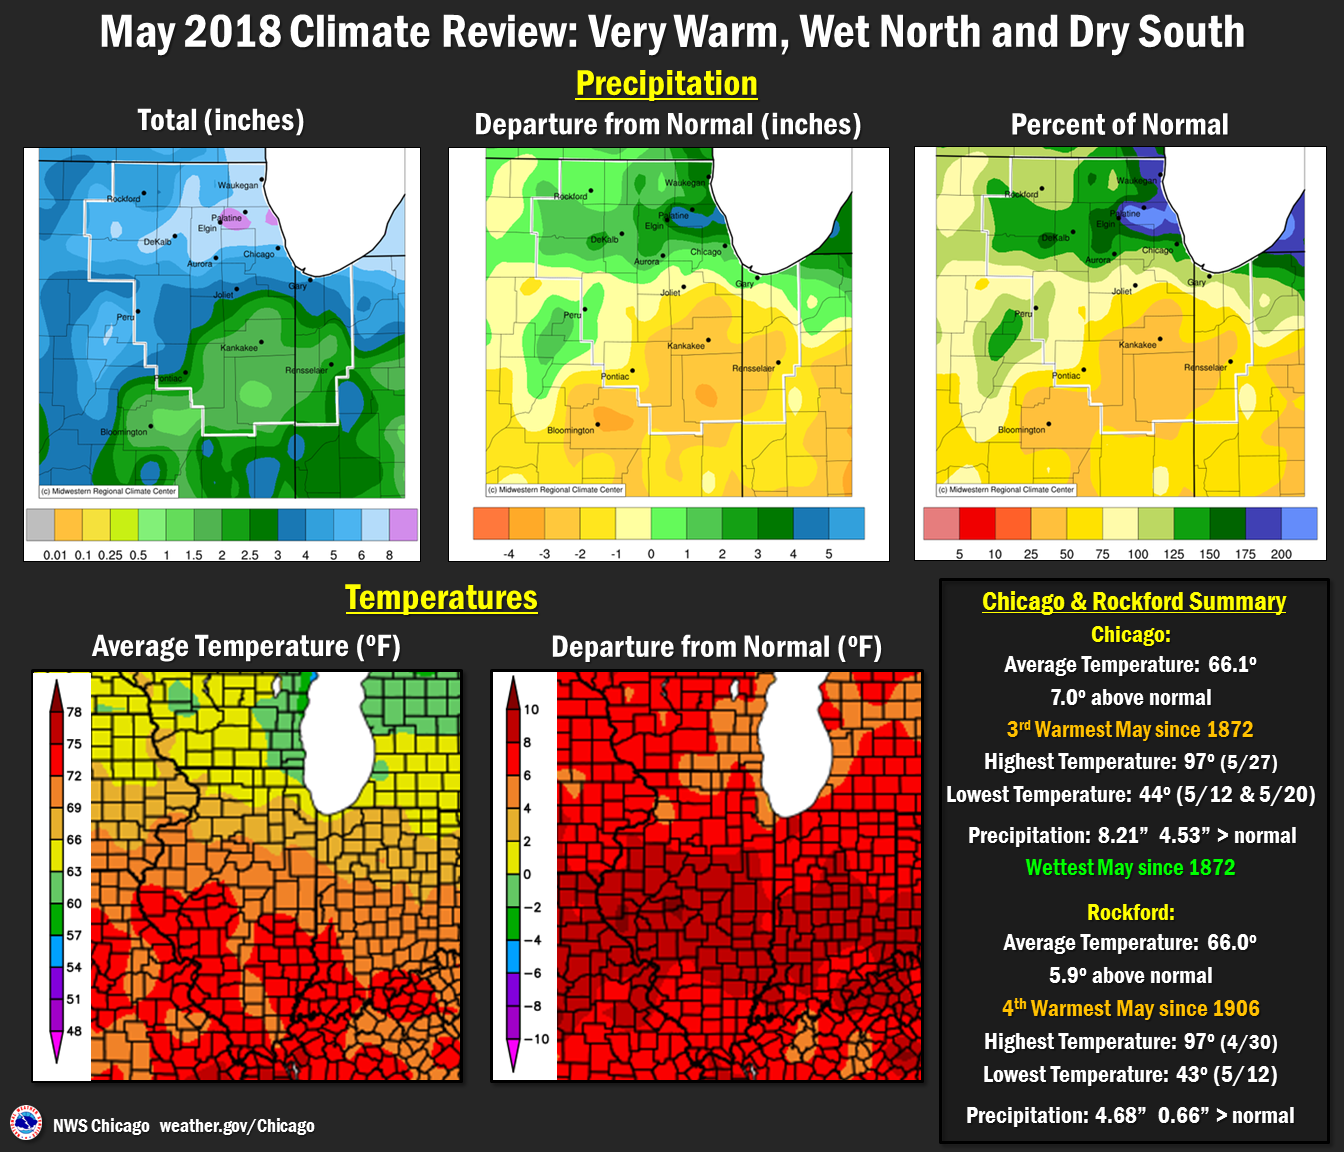 May 2018 Precipitation and Temperatures Overview